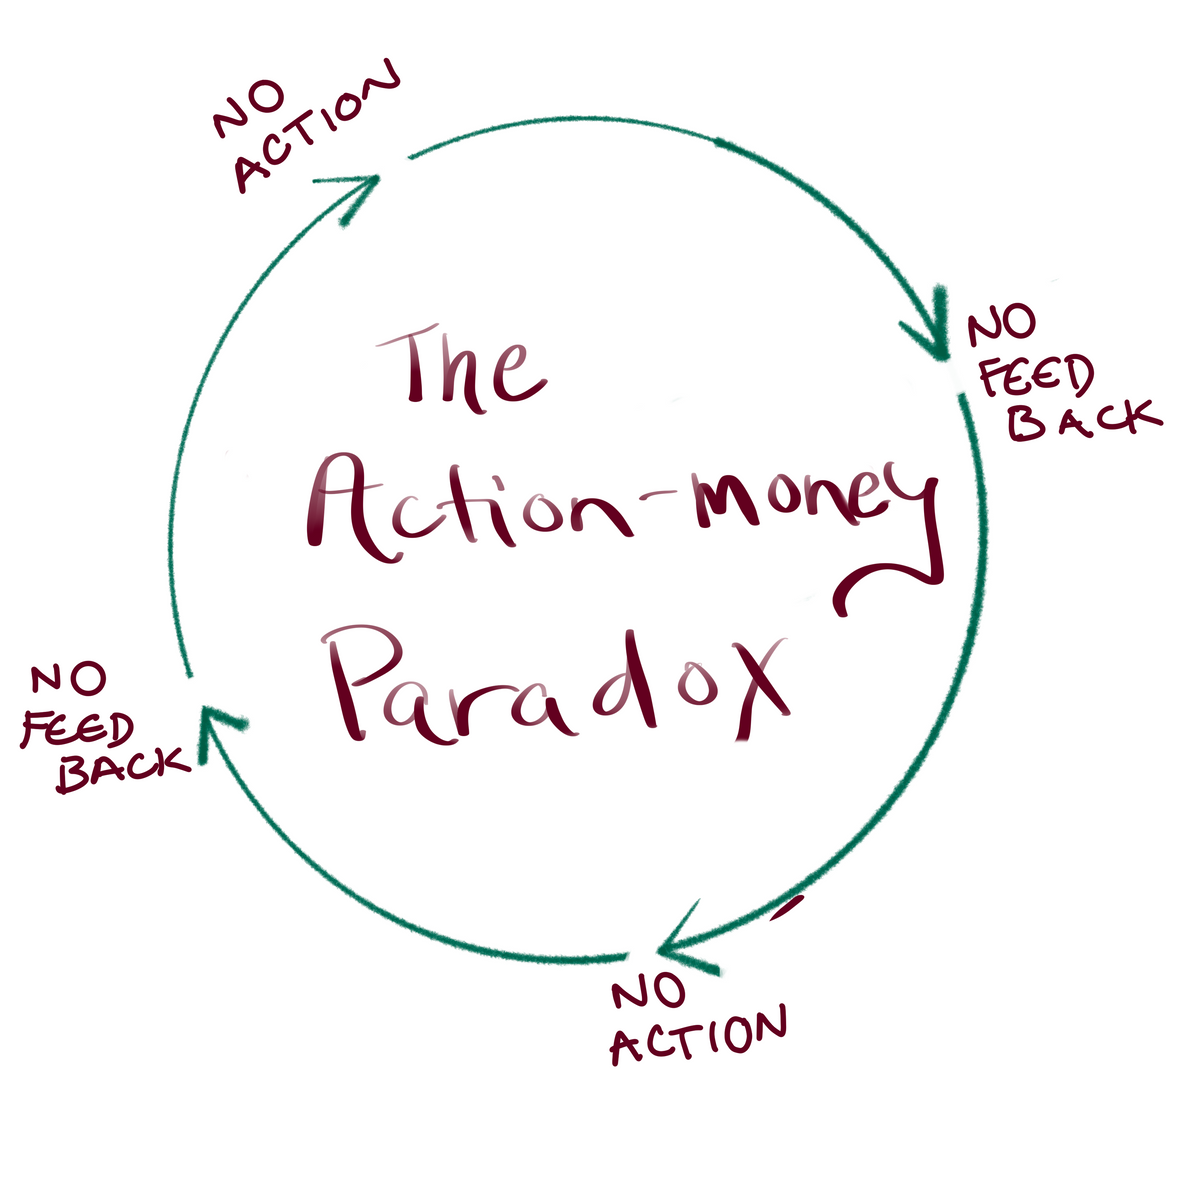 the action-money paradox